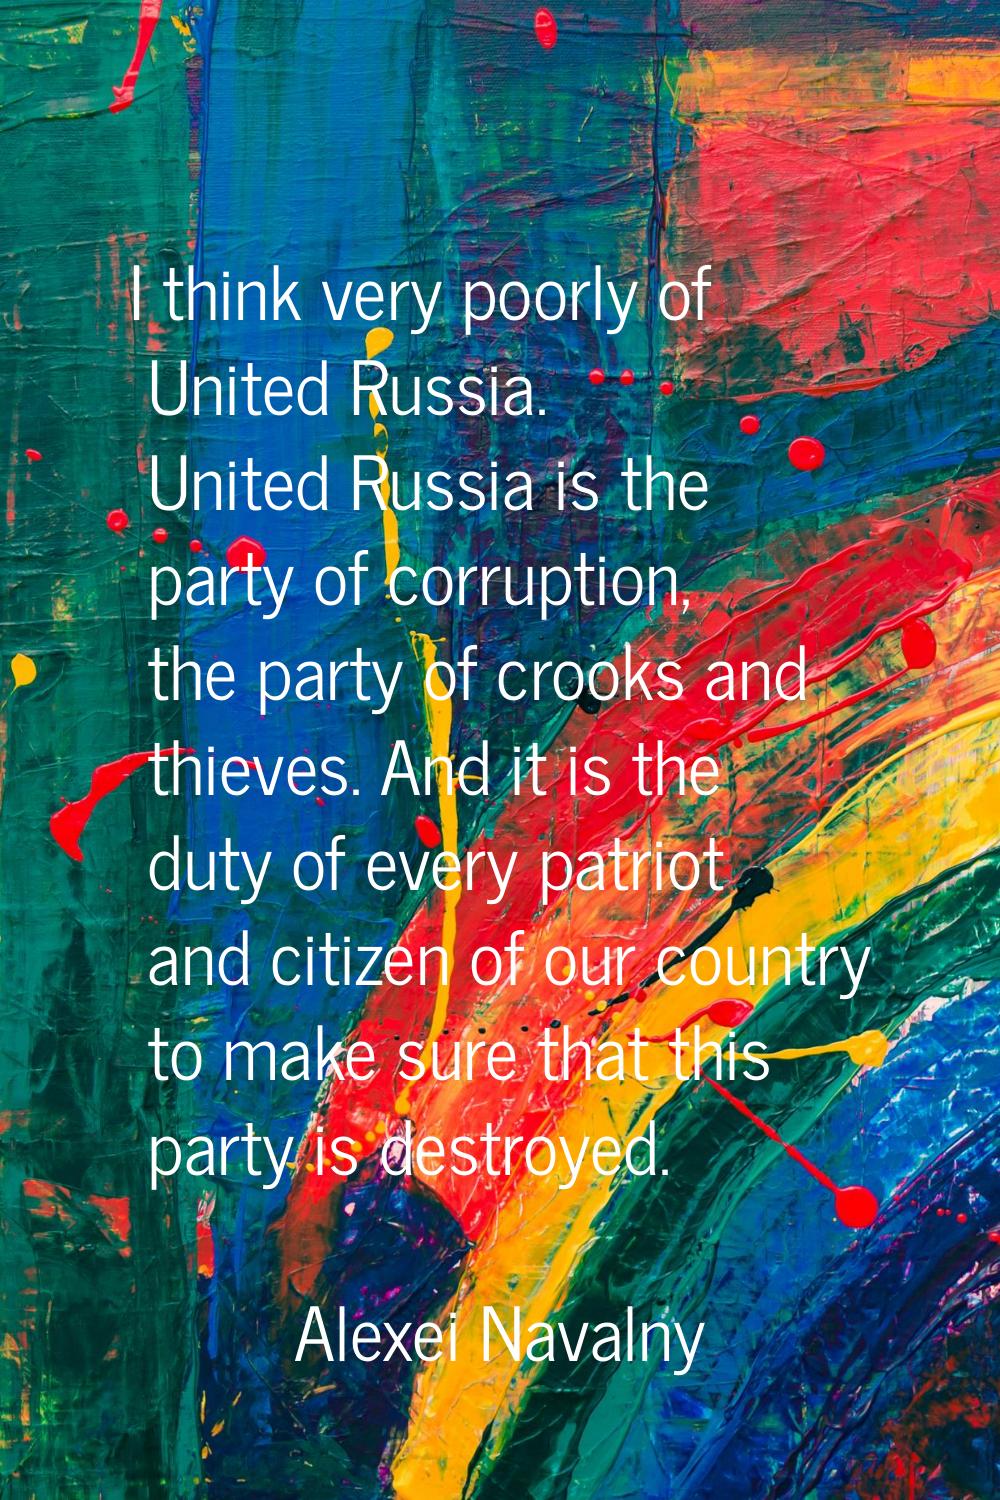 I think very poorly of United Russia. United Russia is the party of corruption, the party of crooks